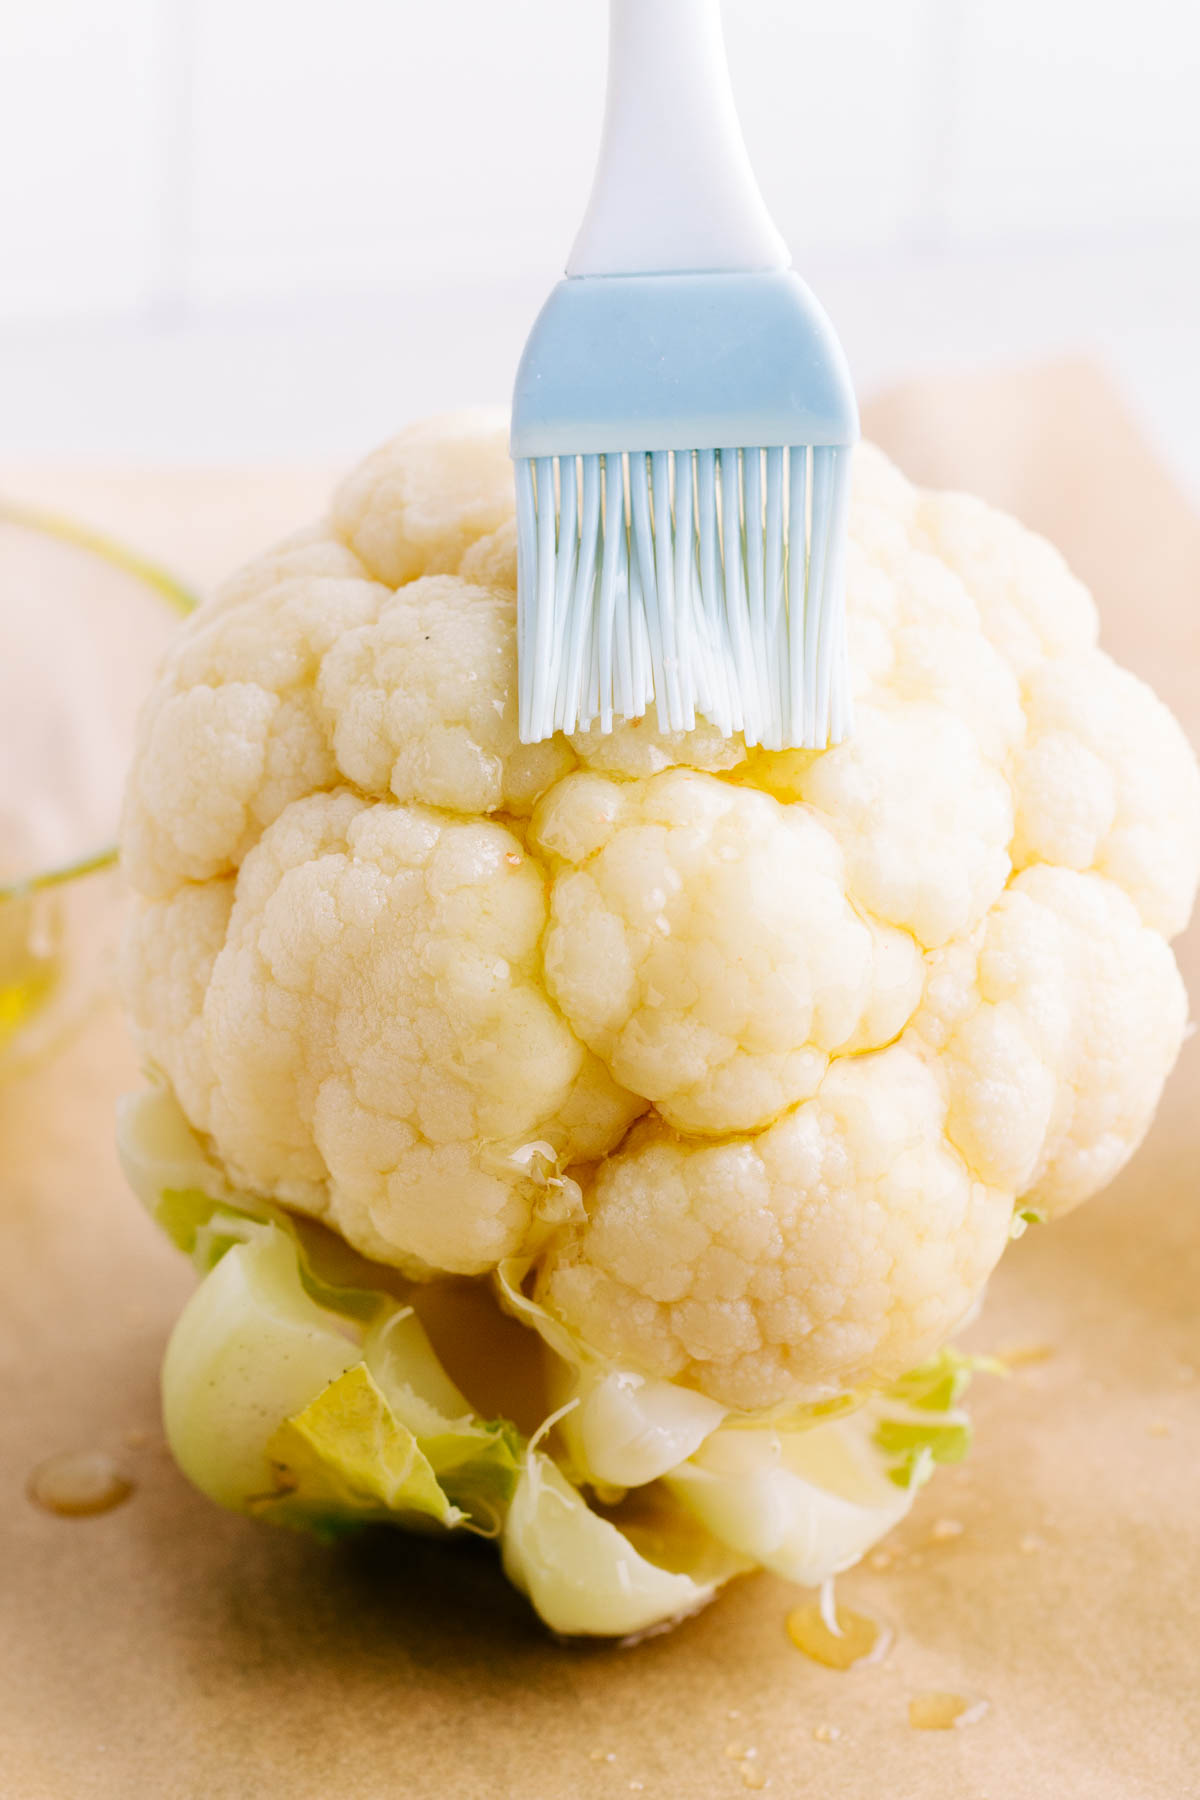 Brown parchment paper with a whole head of cauliflower on it with a few drops of olive oil dripping on the bottom and a blue and white silicone pastry brush brushing olive oil on the cauliflower.